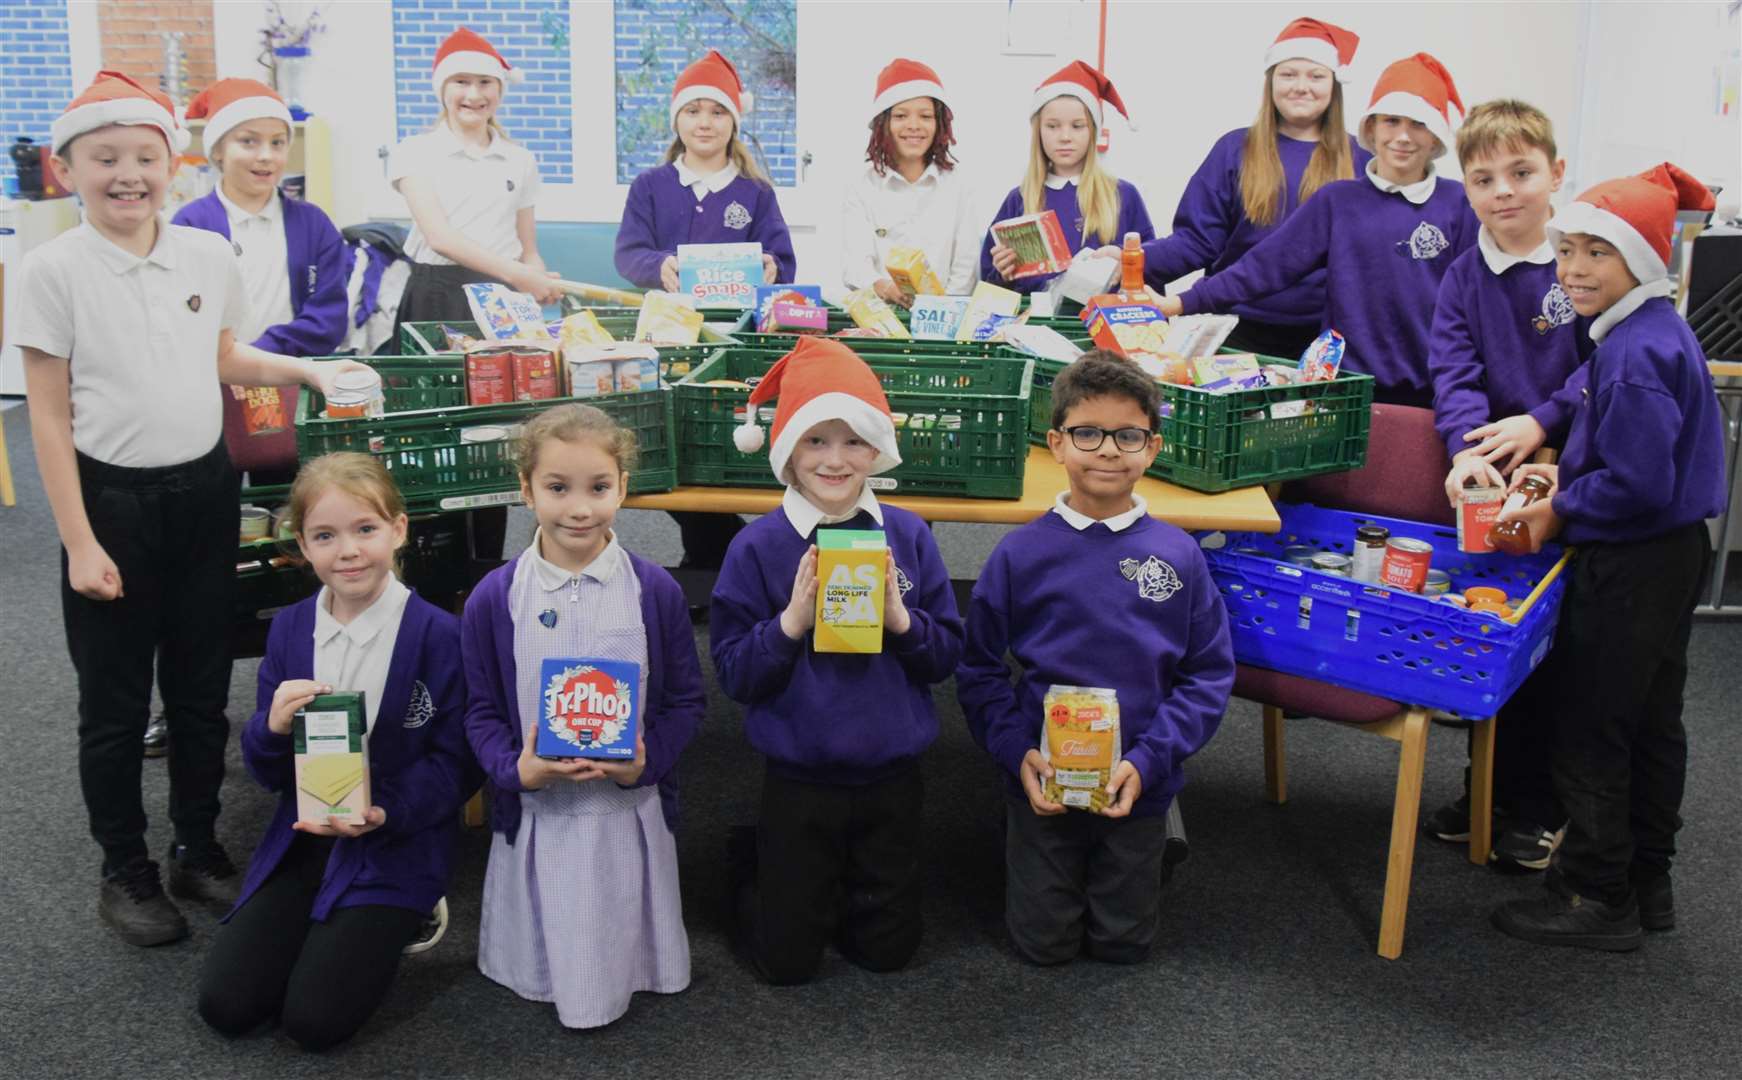 Children from the school's council with some of the donations which have been given. Picture: The Bishops CE Primary Academy